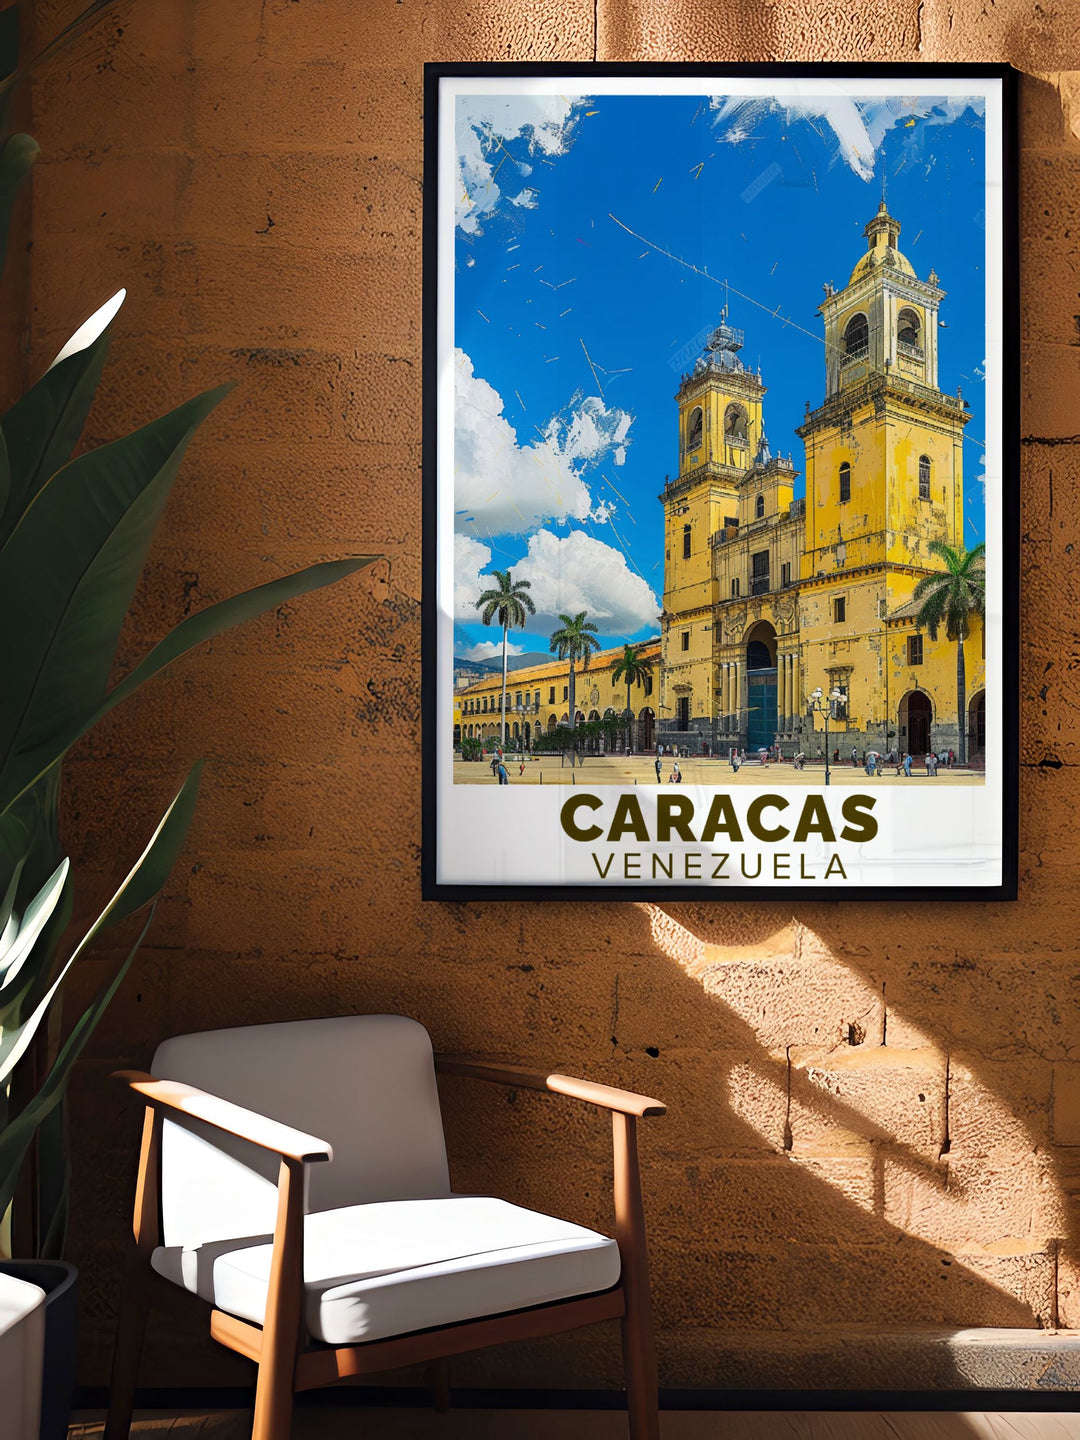 Showcasing Plaza Bolivars historical beauty and Caracass cultural vibrancy, this poster is ideal for art lovers who appreciate the diverse and stunning landscapes of Venezuela.